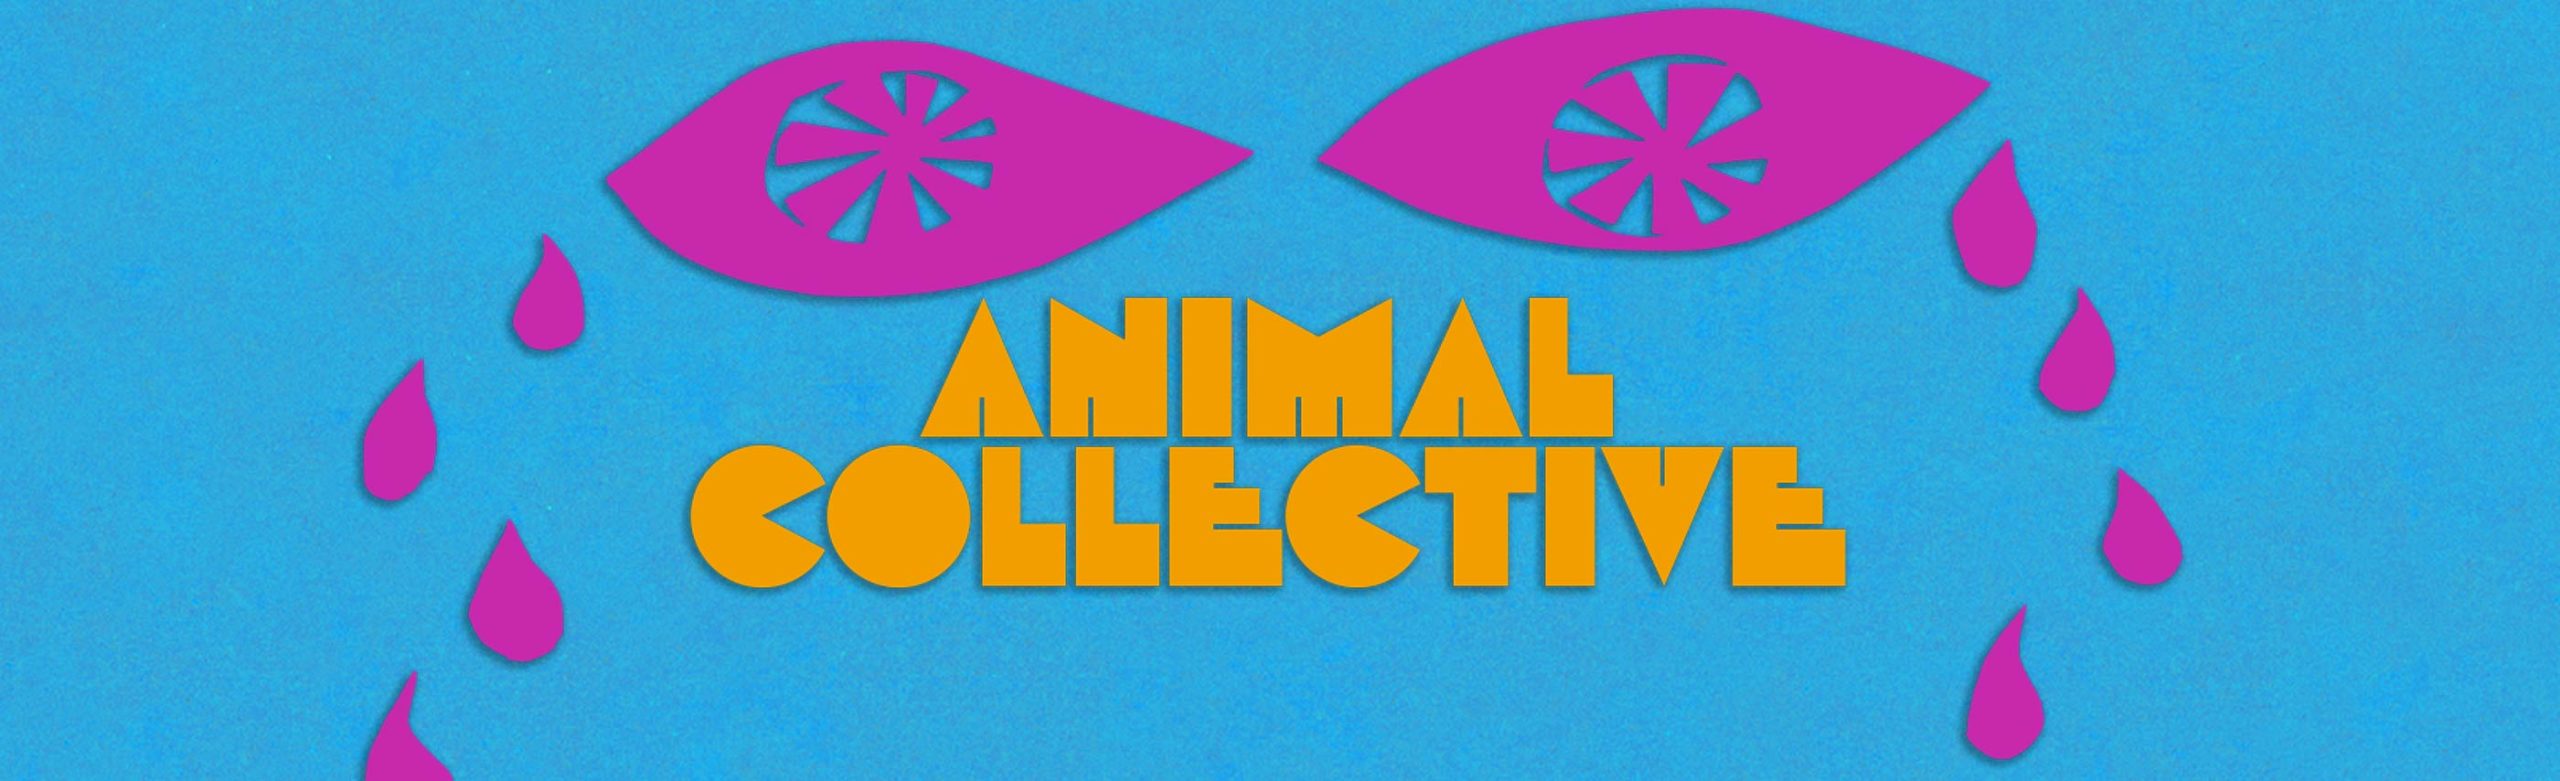 Animal Collective Will Return to Montana for Two Concerts in 2022 Image